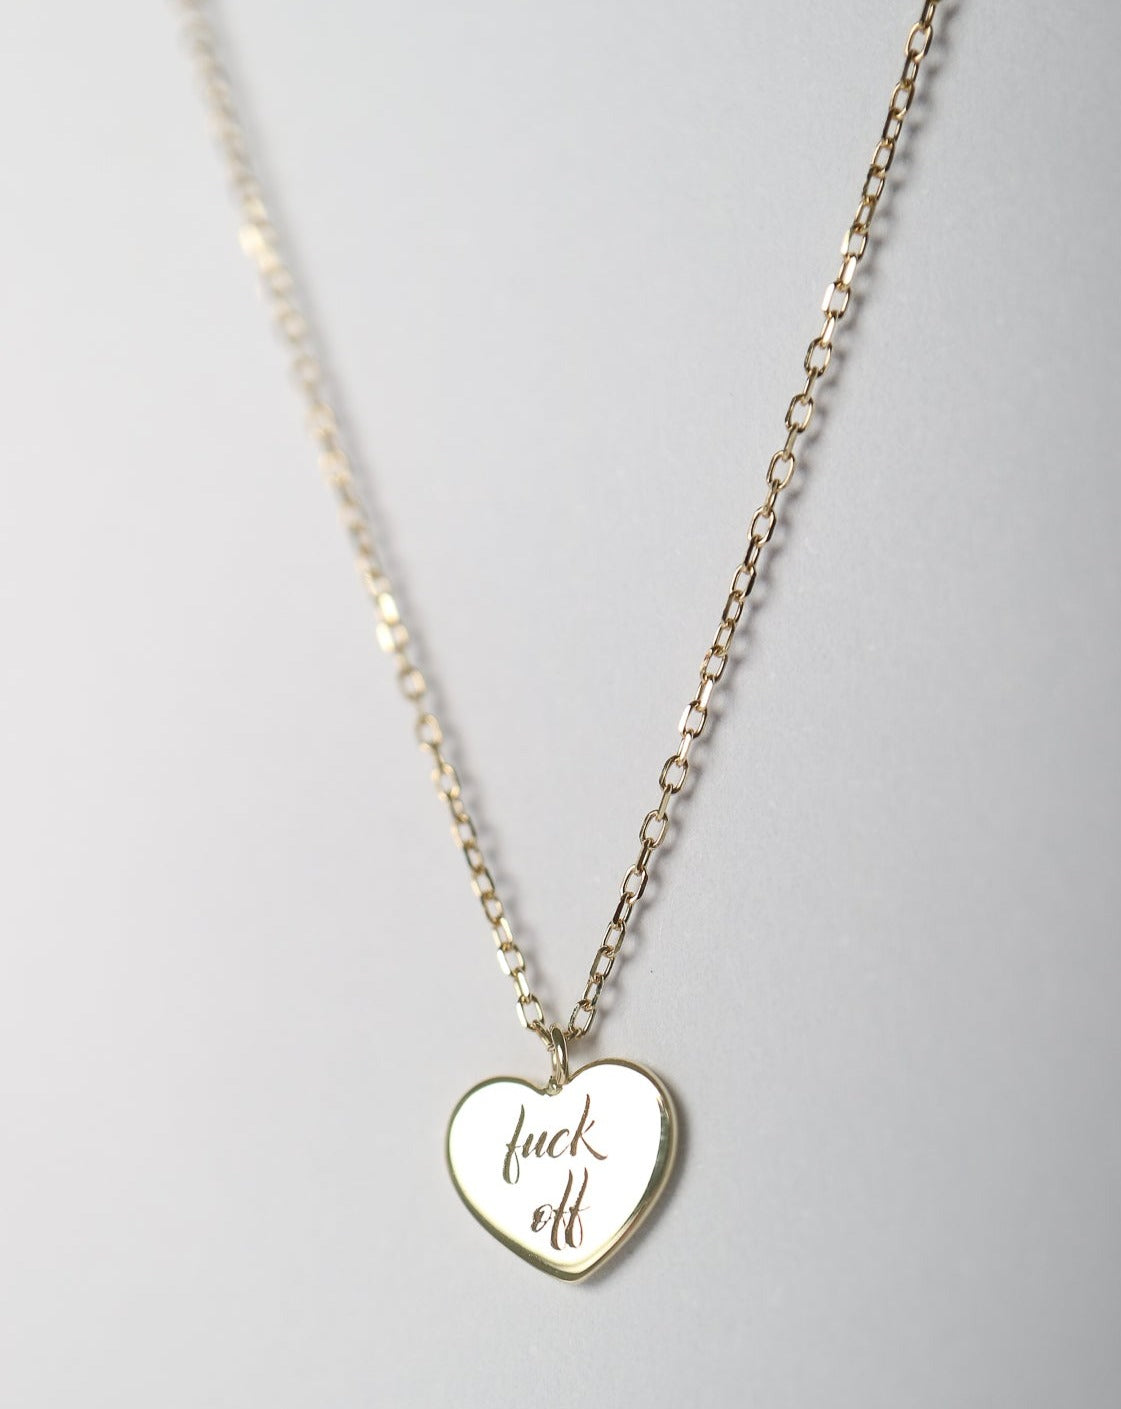 9kt gold Heart Pendant with "fuck off" engraved d